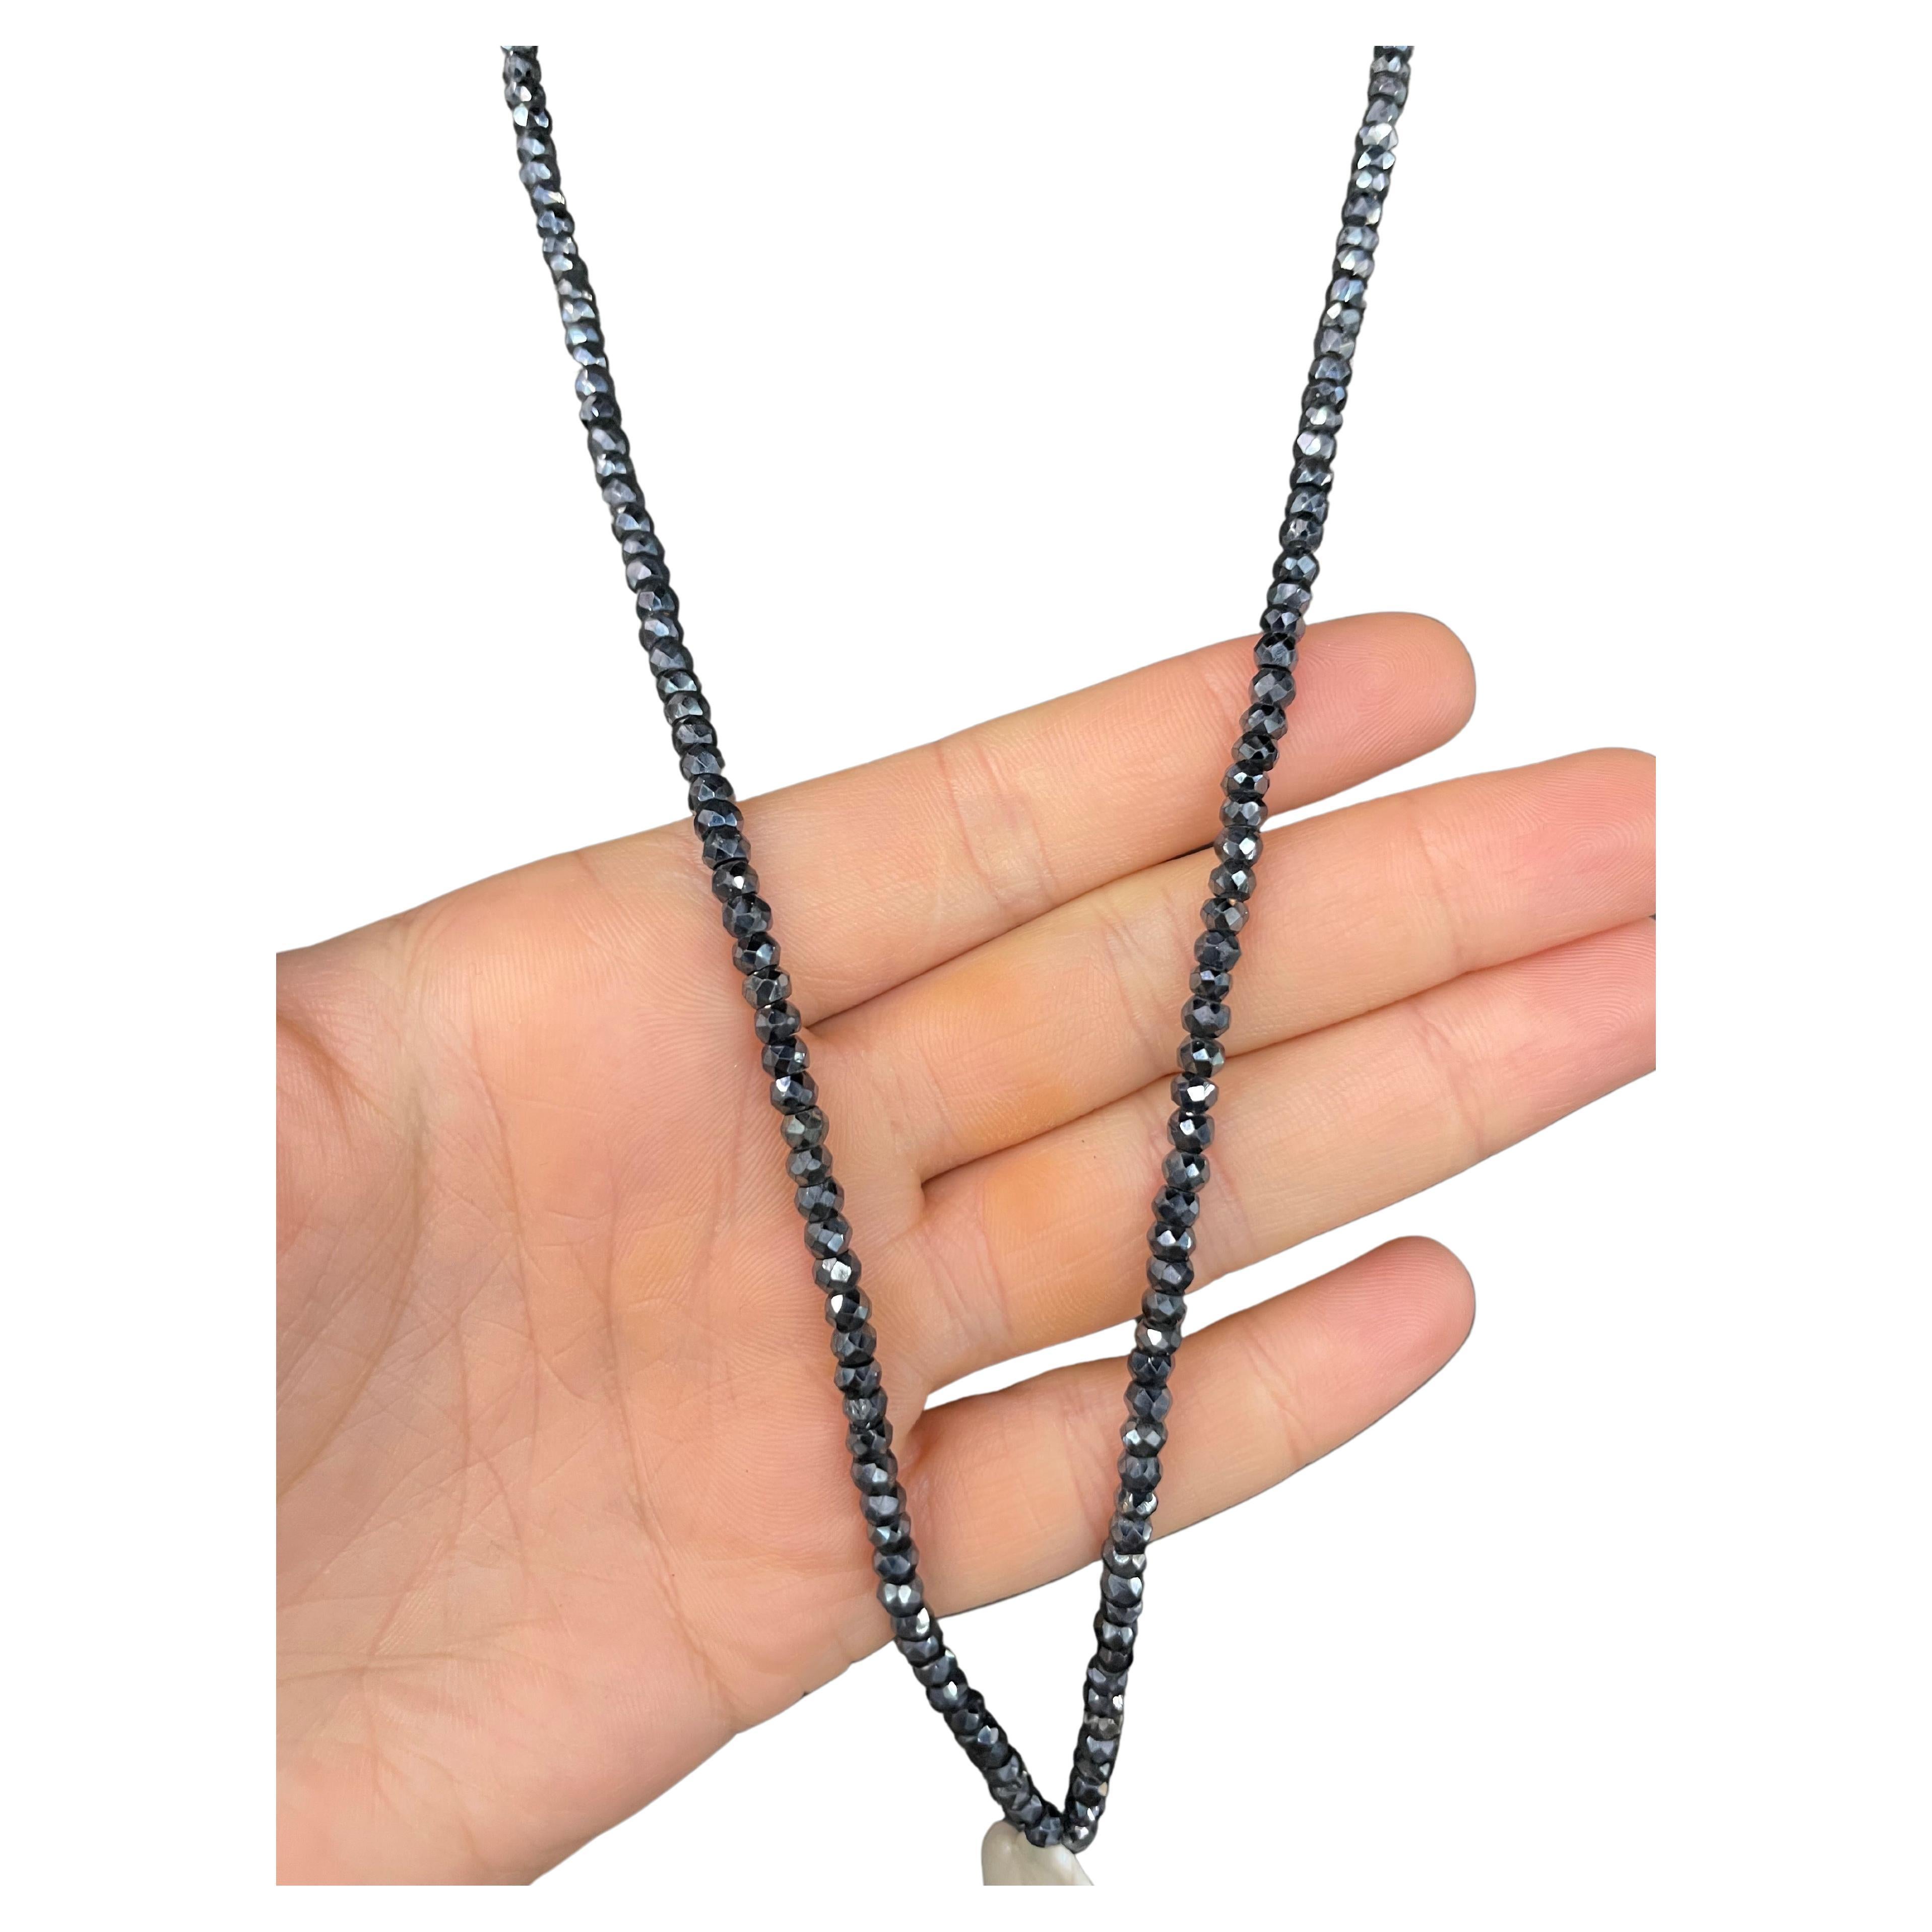 Long Mystic Spinel beads measuring 30.5 inches with a drop featuring three Baroque Pearls. 
Necklace 30.5 Inches 
Drop 5.5 Inches